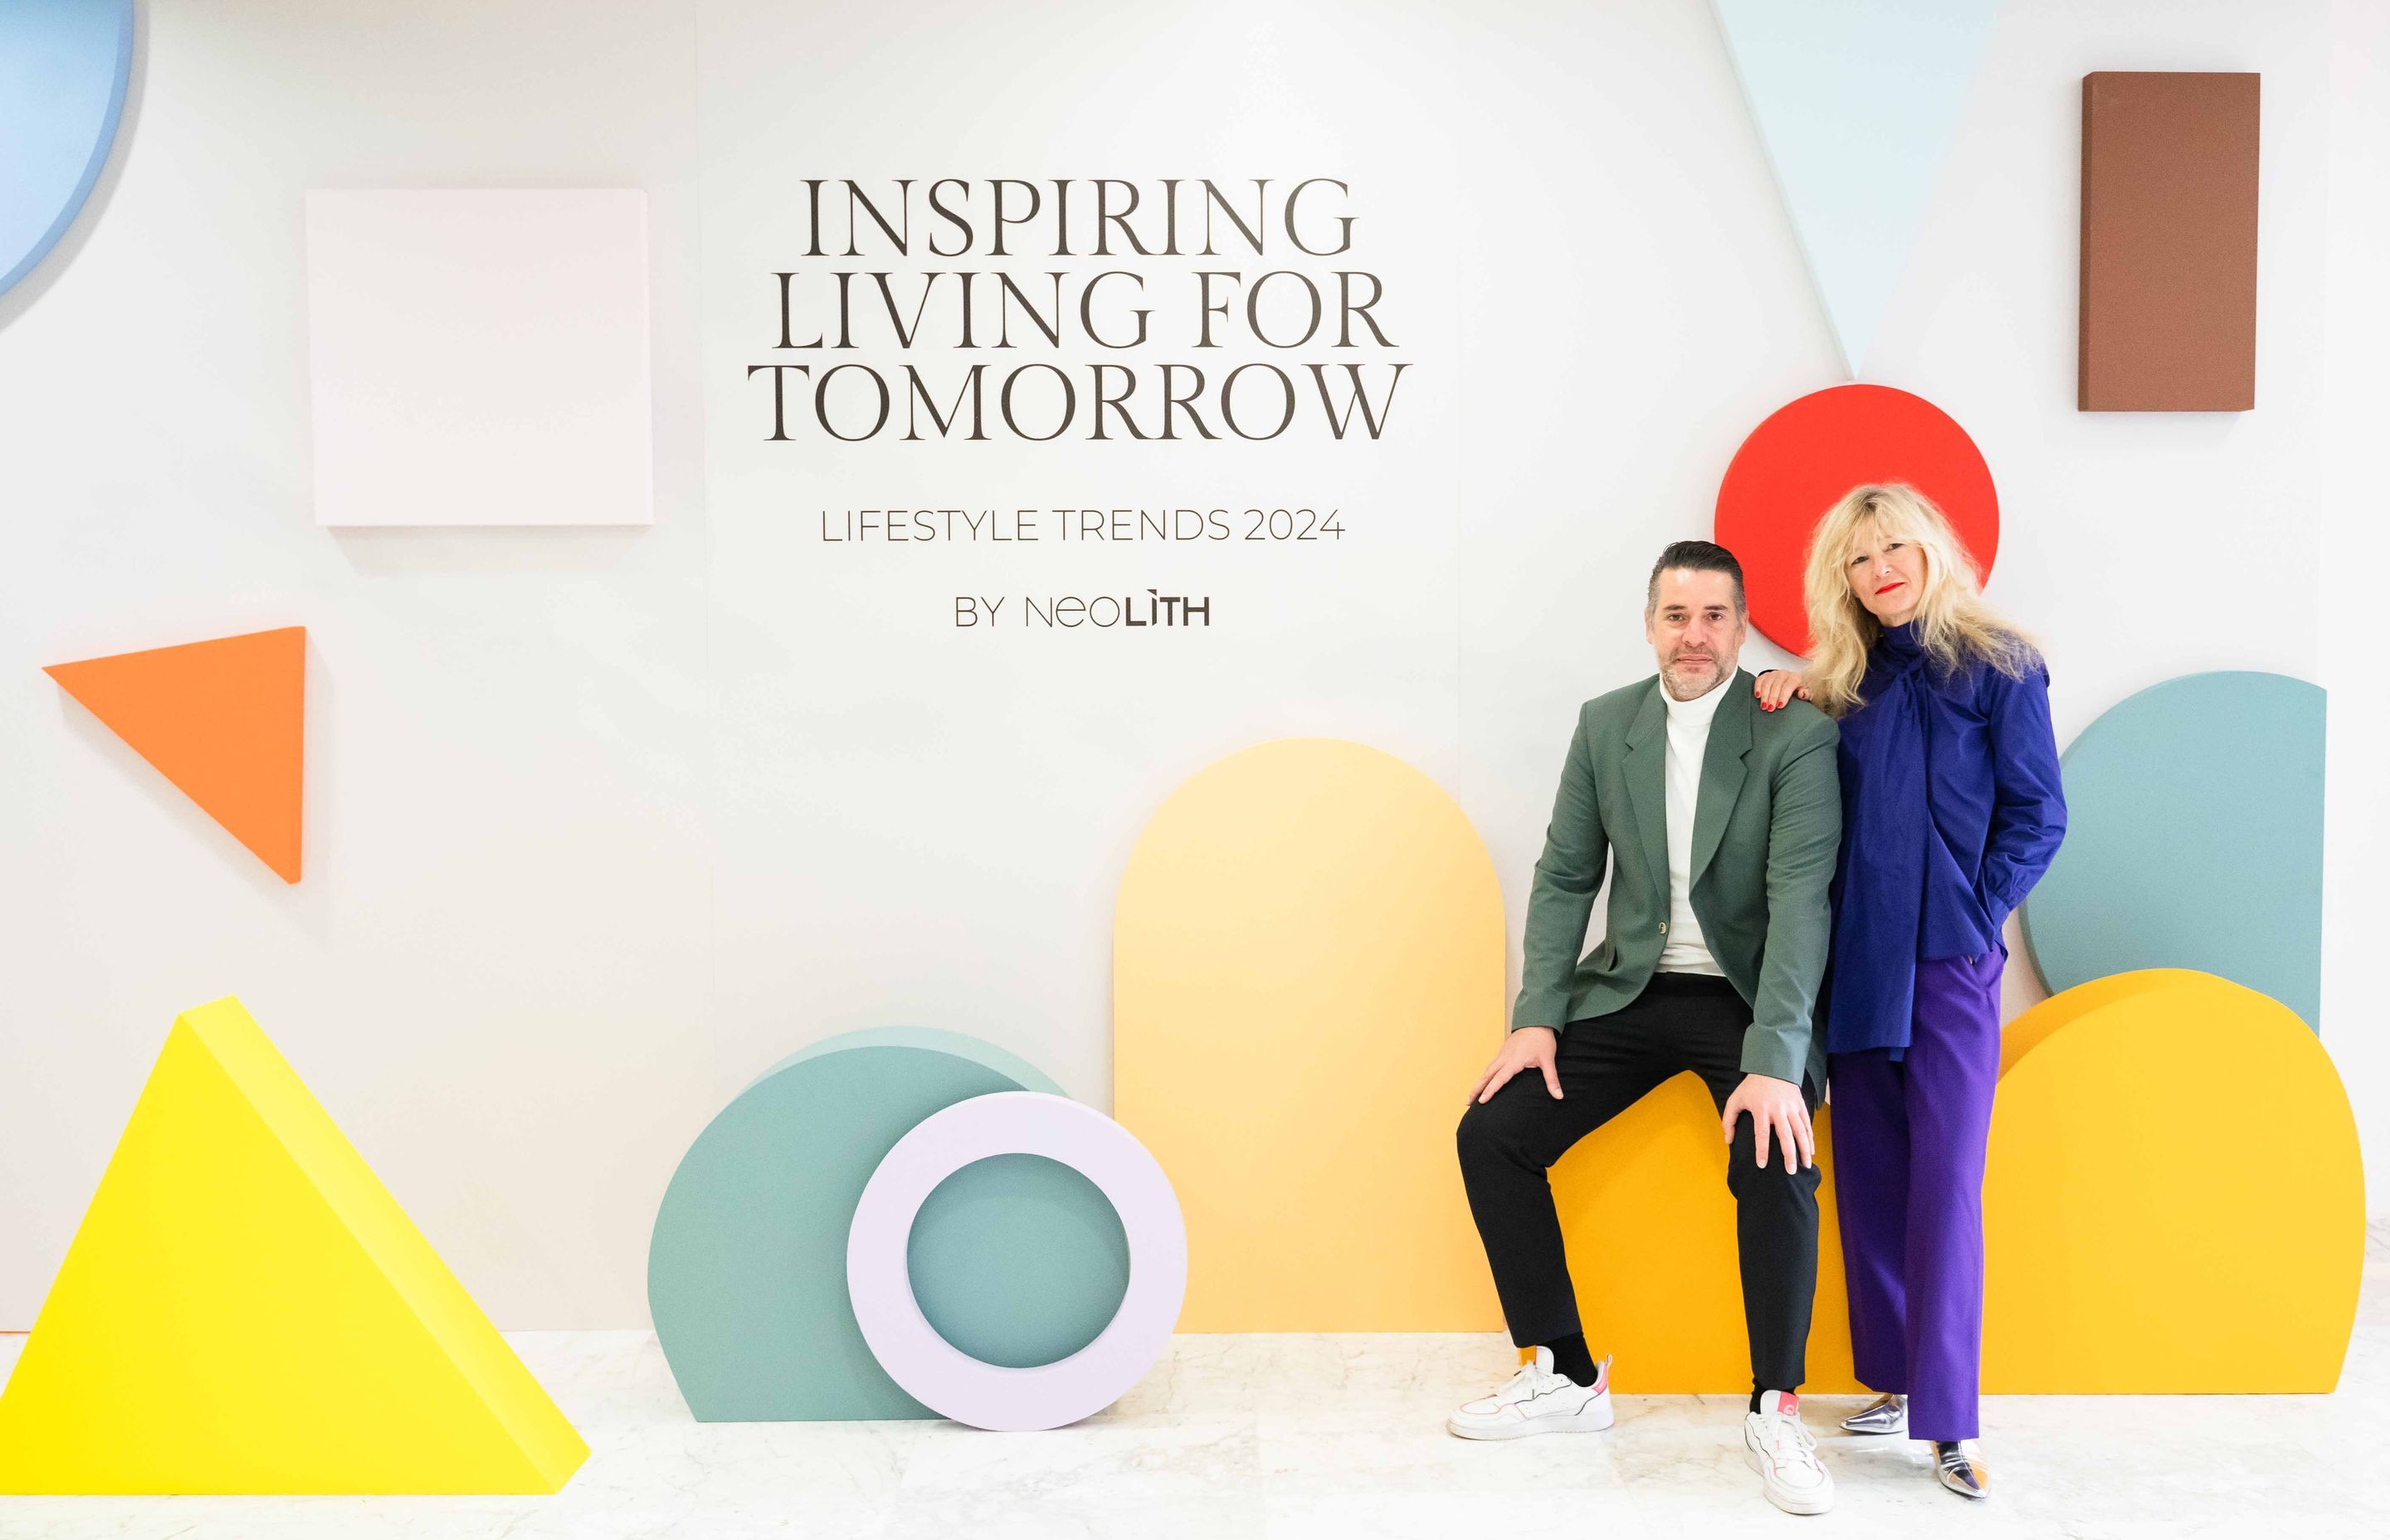 Inspiring living for tomorrow. lifestyle trends 2024 by Neolith